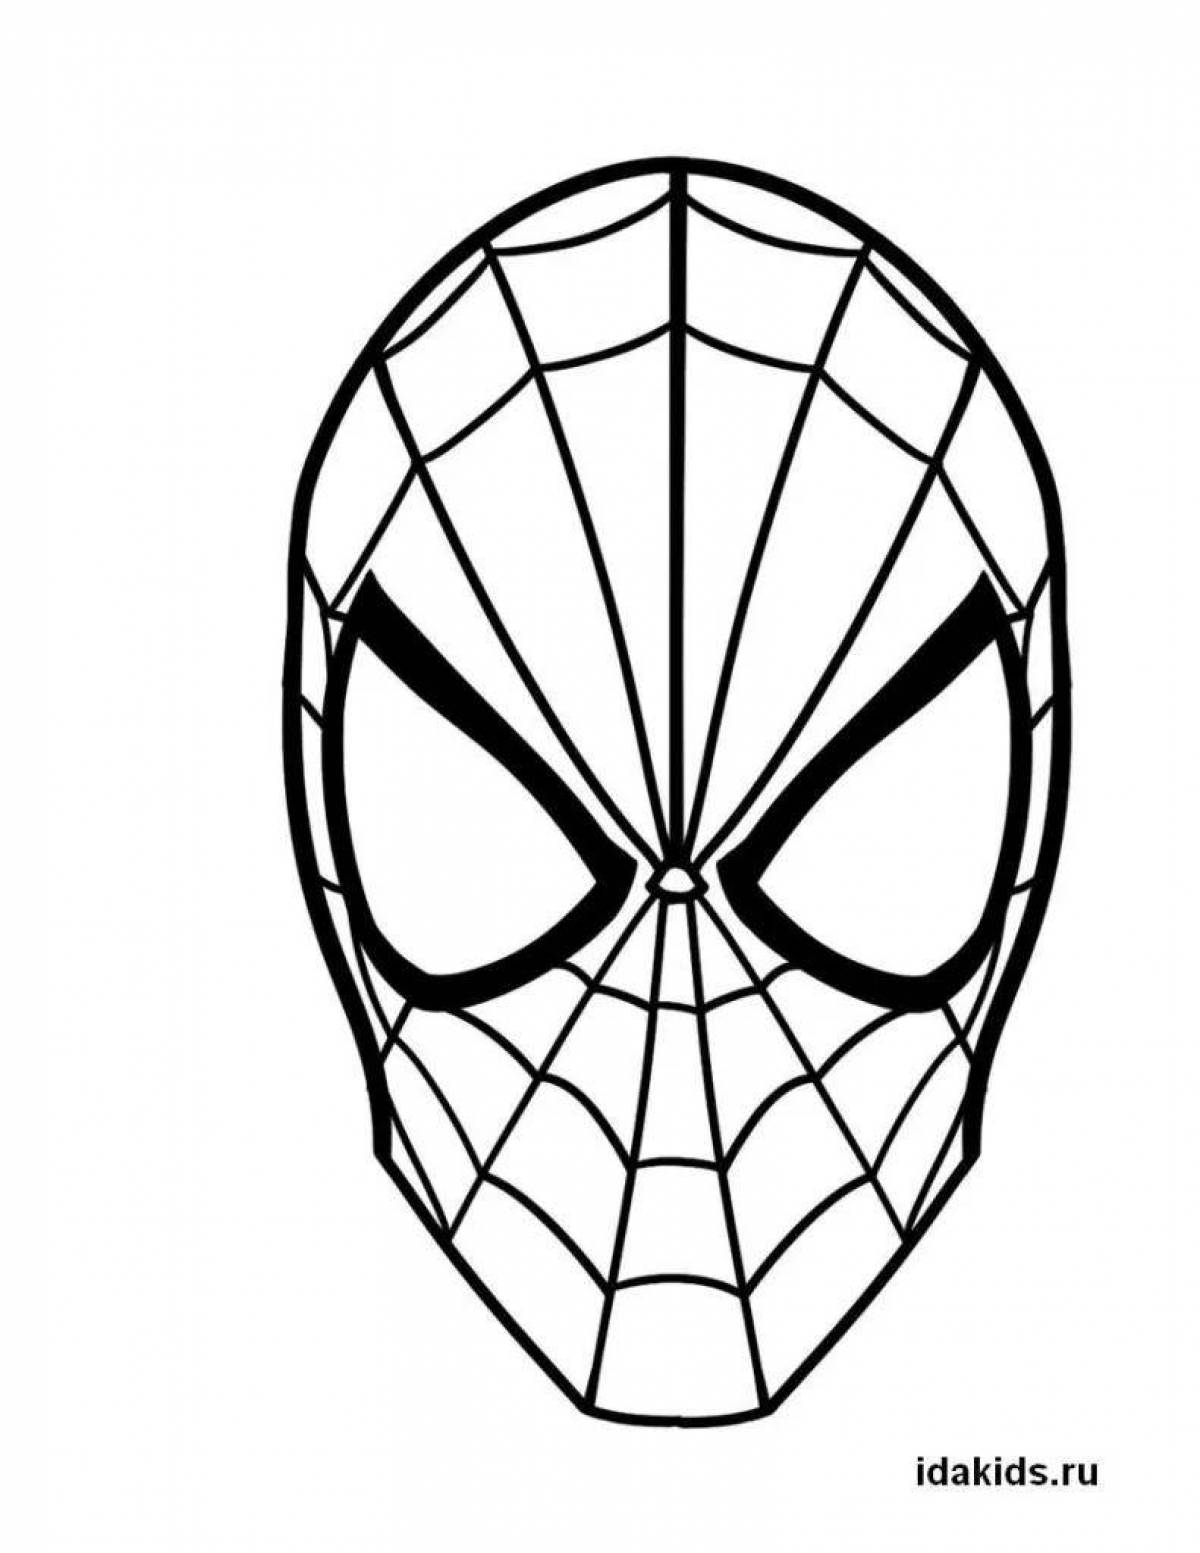 Spider-Man intense mask coloring page